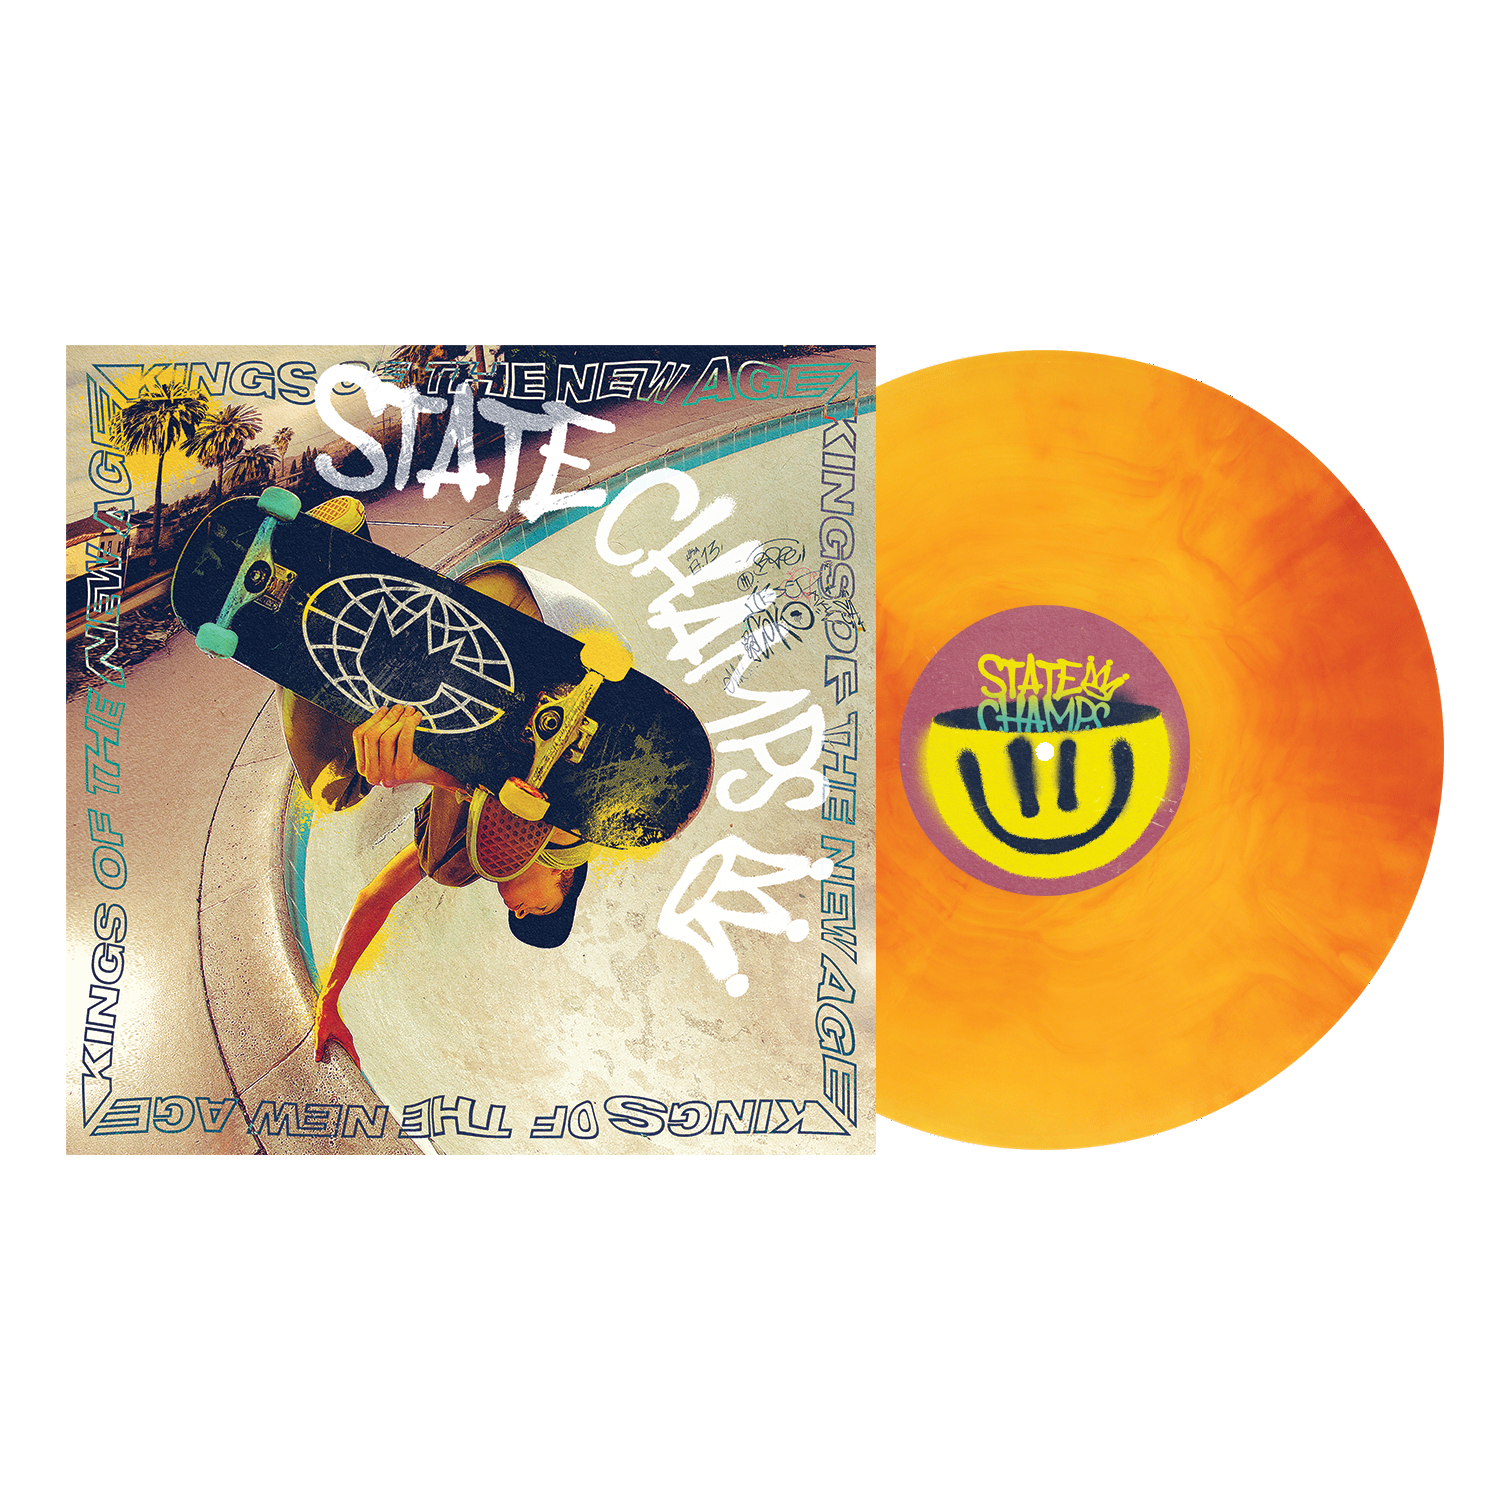 State Champs - Kings Of The New Age (Ltd. Ed. Yellow Vinyl) - Blind Tiger Record Club